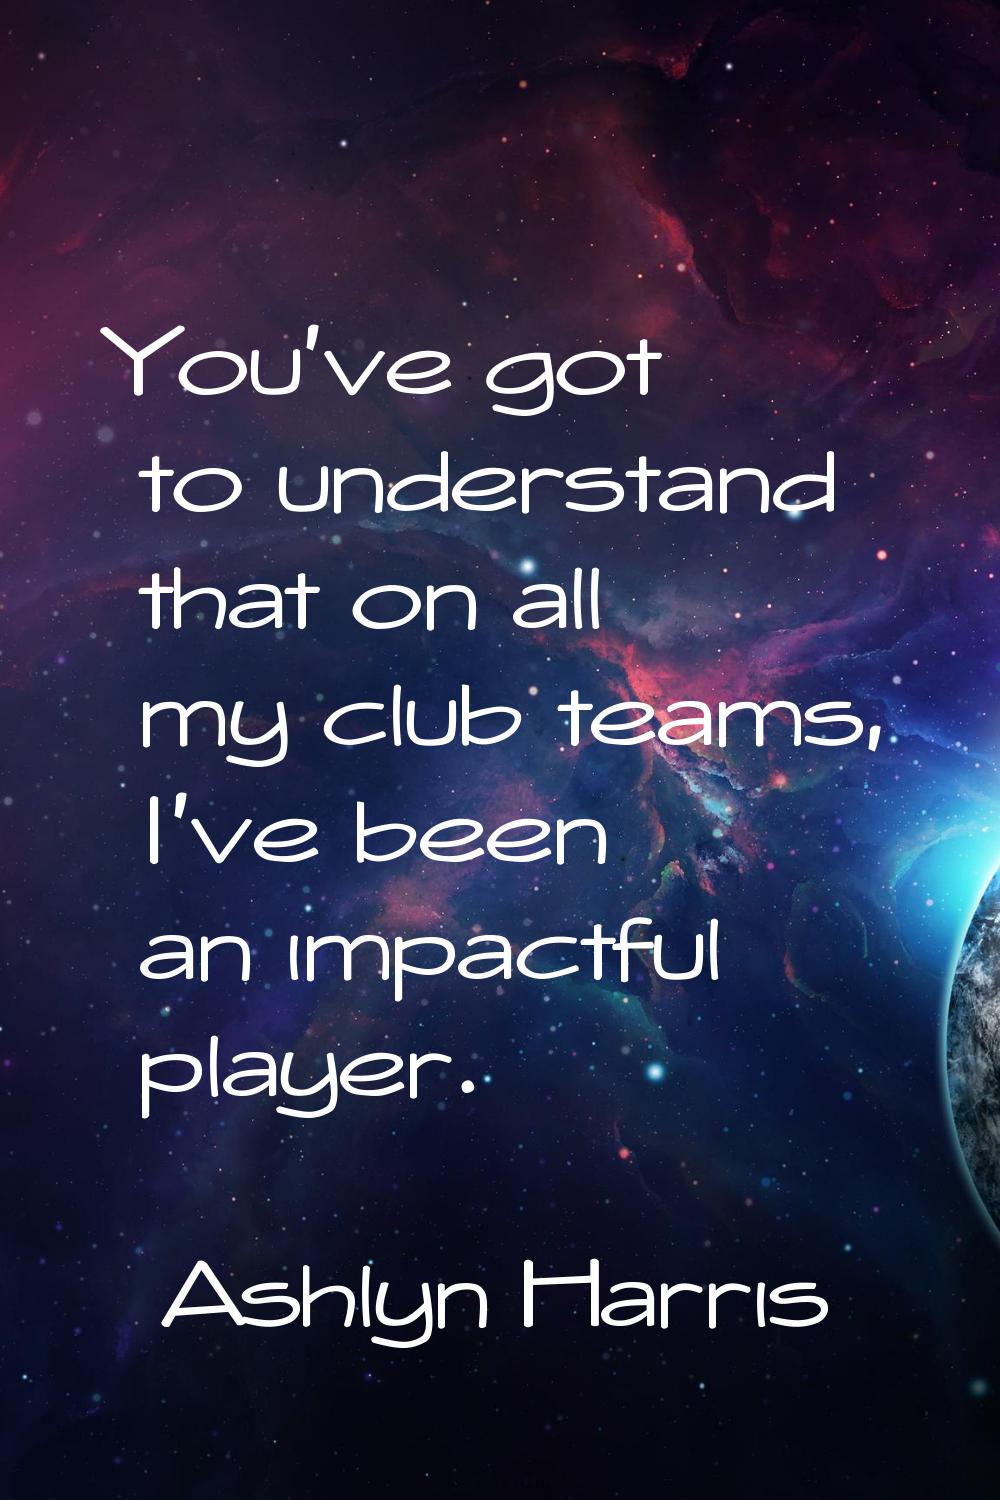 You've got to understand that on all my club teams, I've been an impactful player.